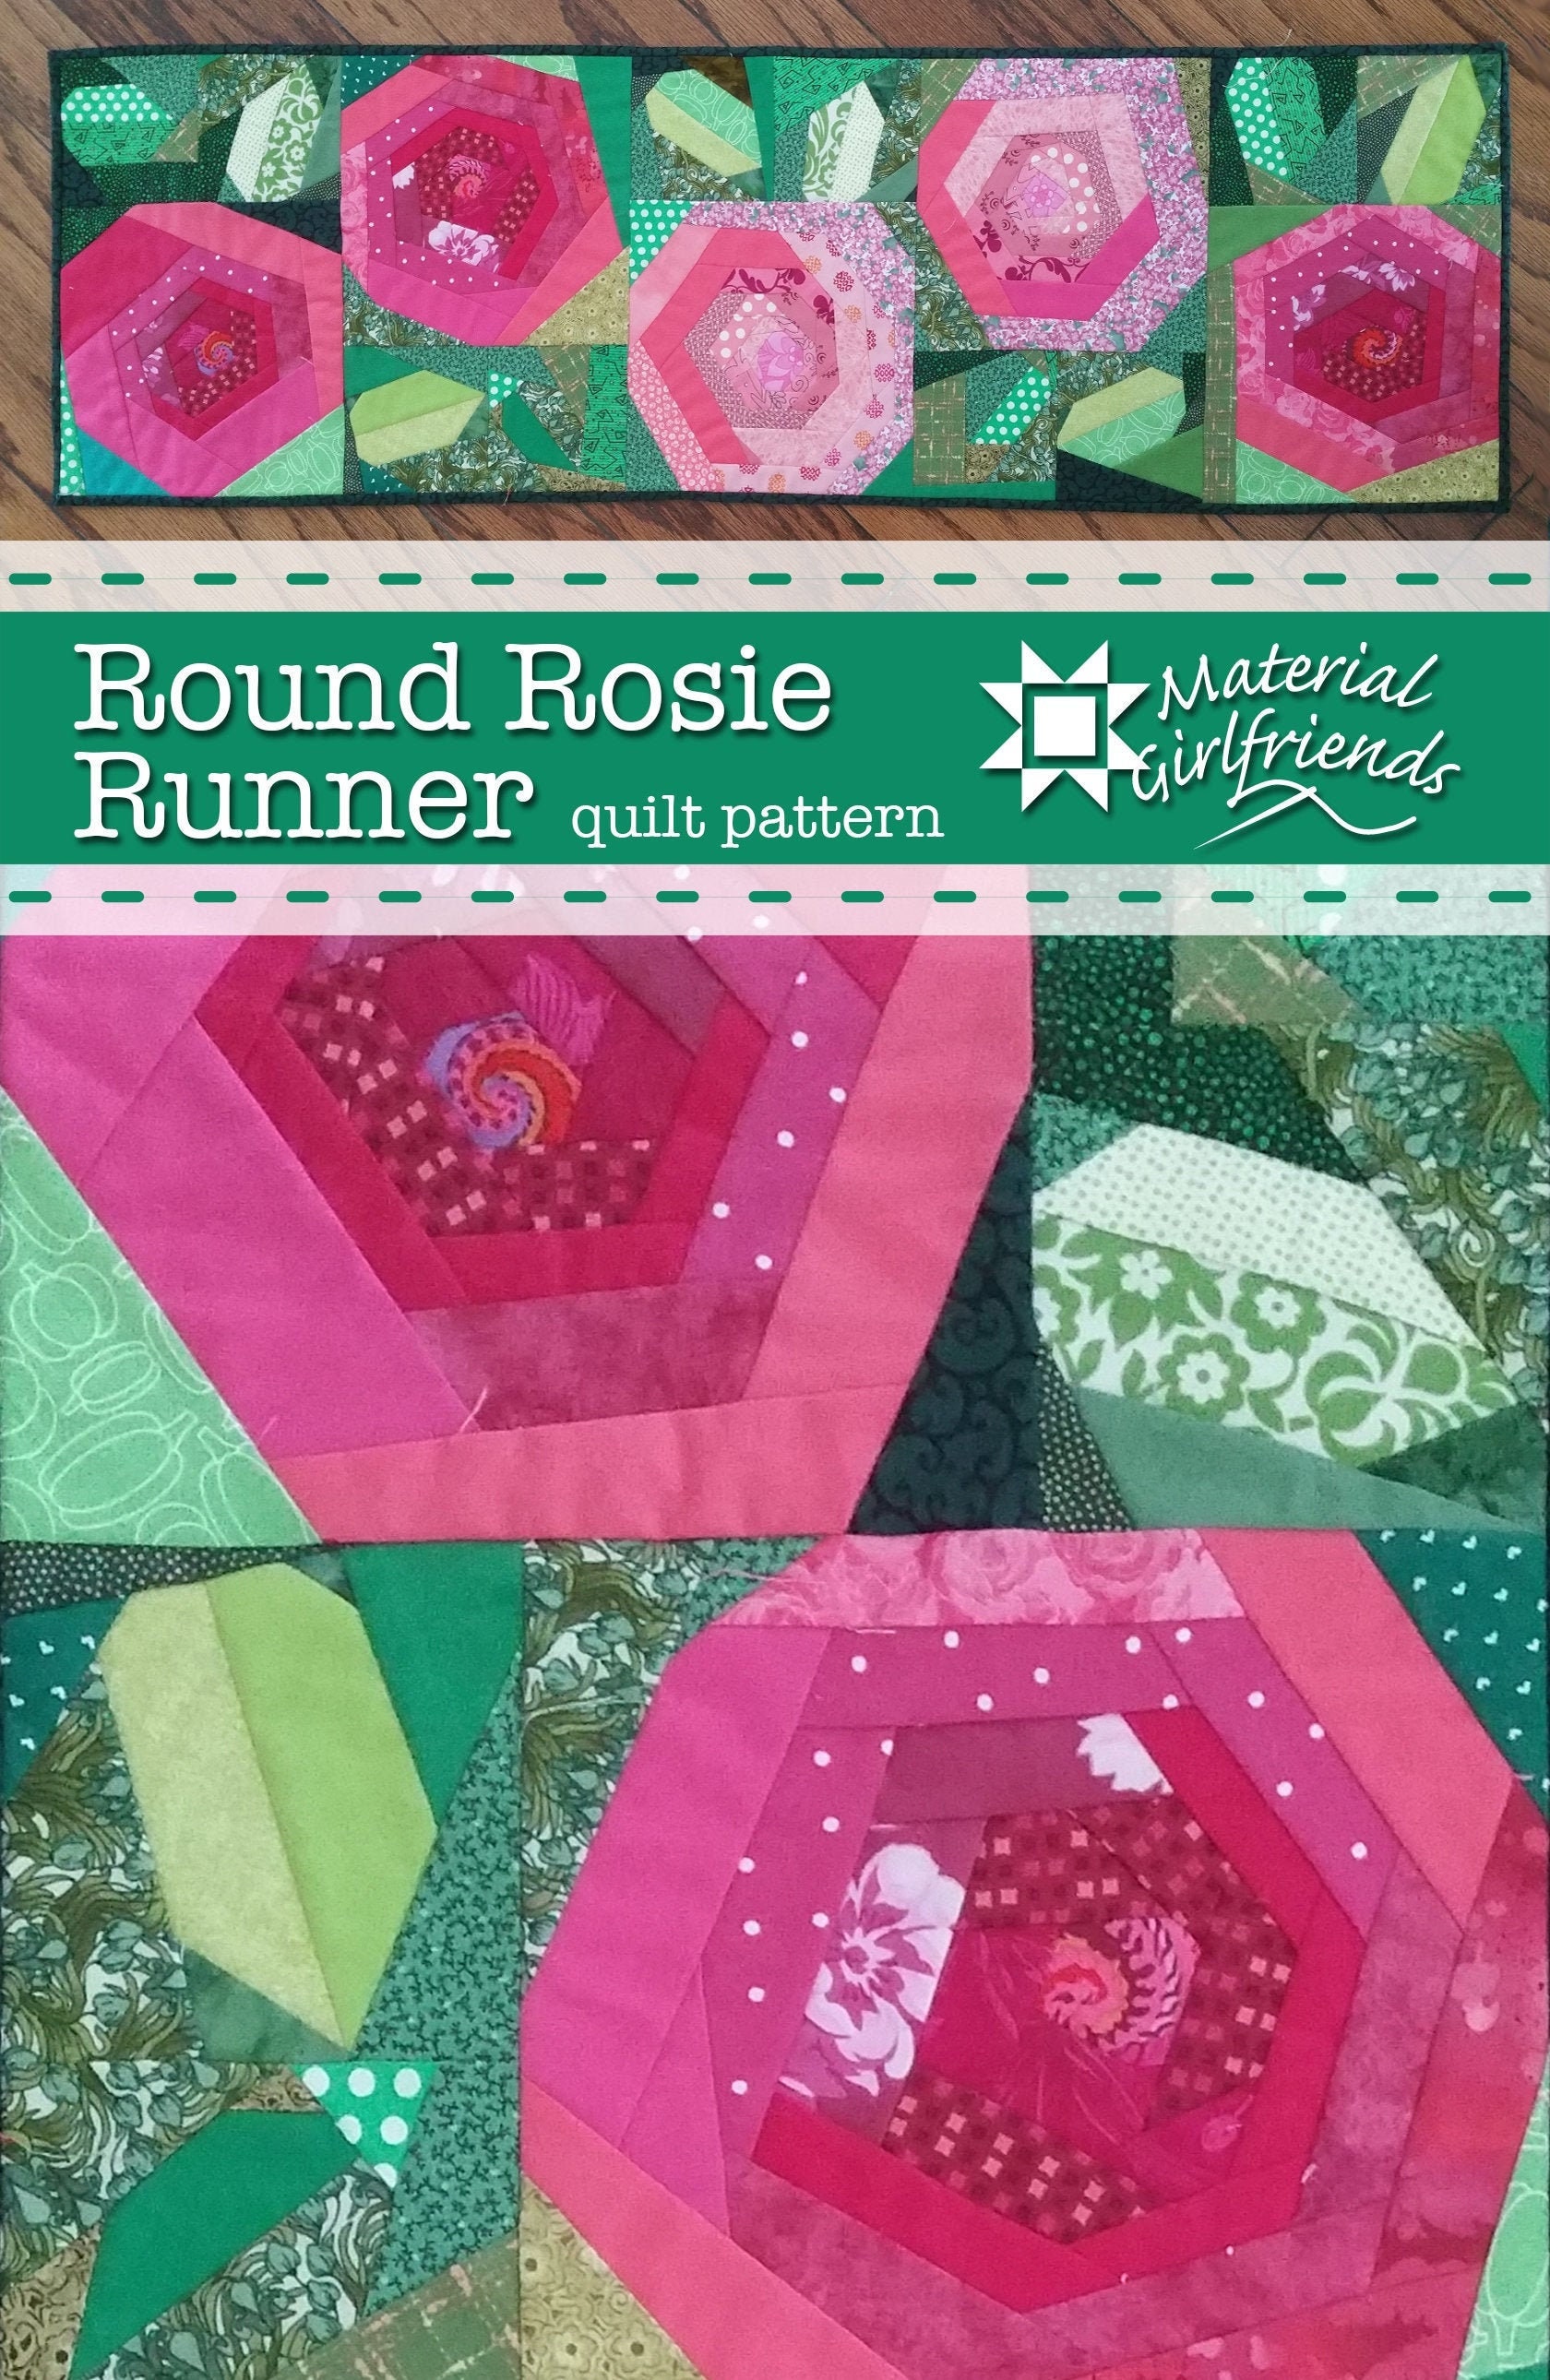 Digital Download Round Rosie Runner Quilt Pattern by Material Girlfriends Scrap Buster easy quilt pattern table runner